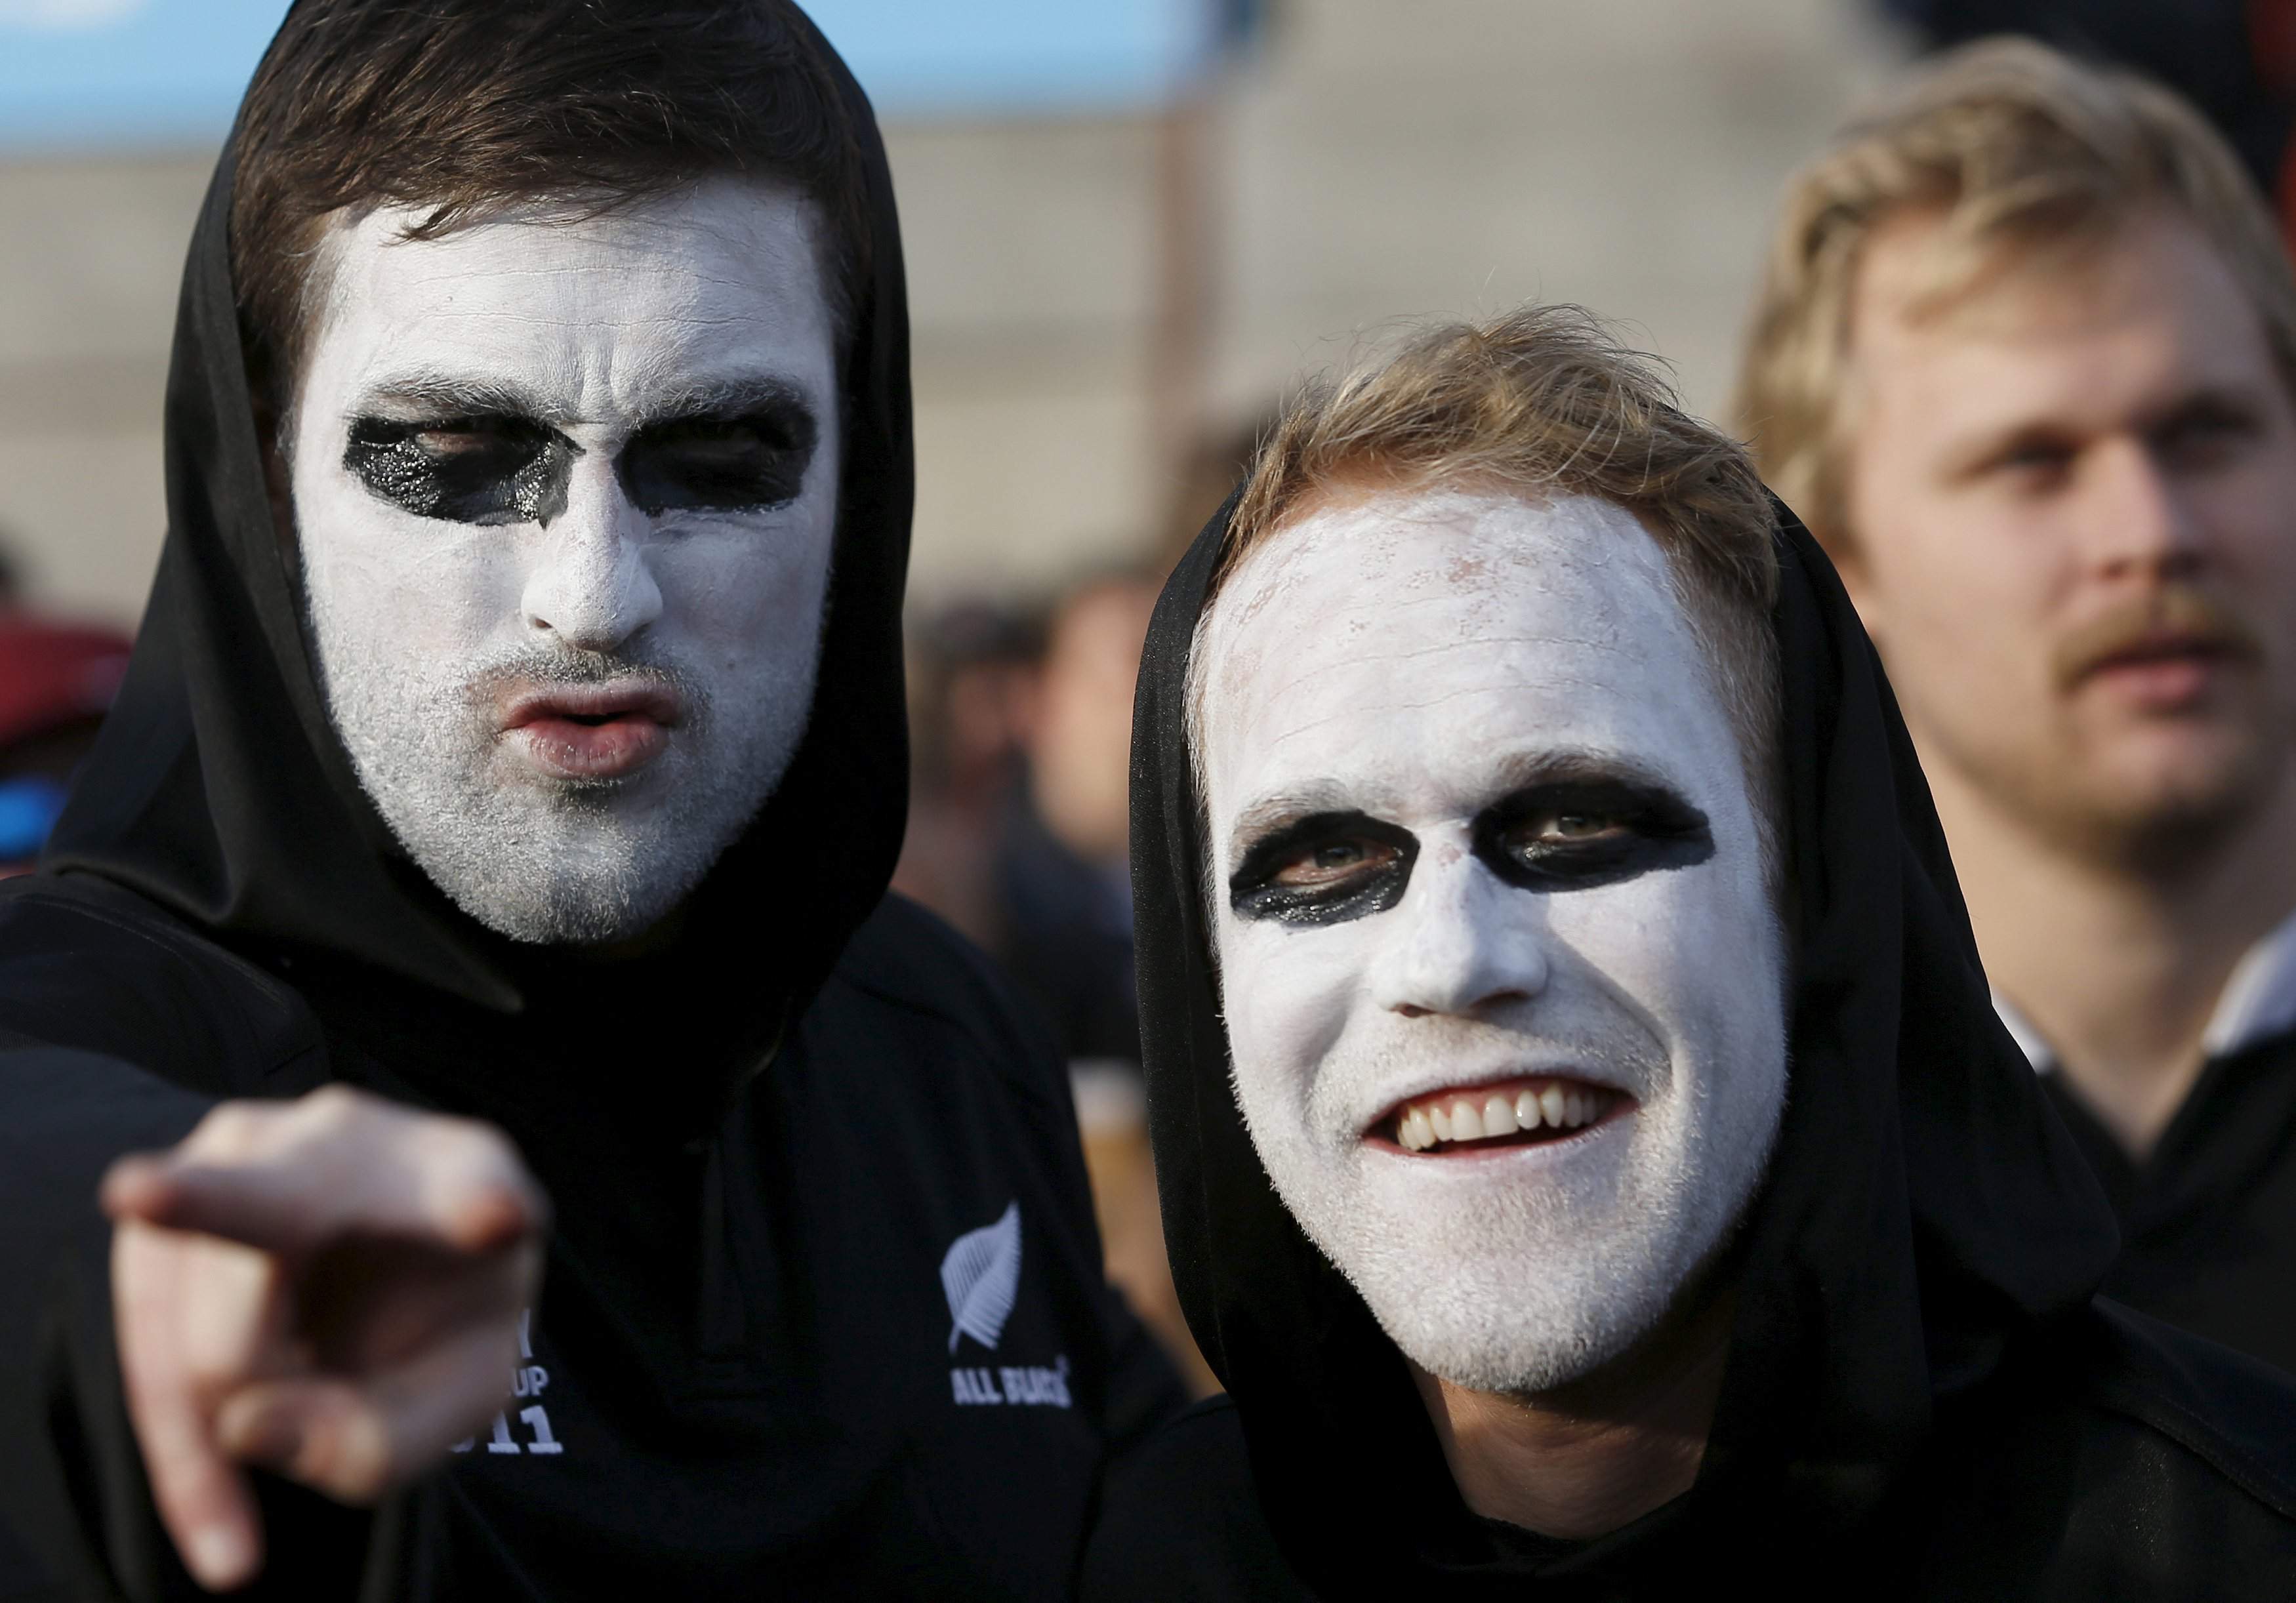 'All Blacks' rugby fans in face-paint are pictured before a showing of the Rugby World Cup final in a fan-zone in Trafalgar Square, London, Britain, October 31, 2015.  REUTERS/Peter Nicholls